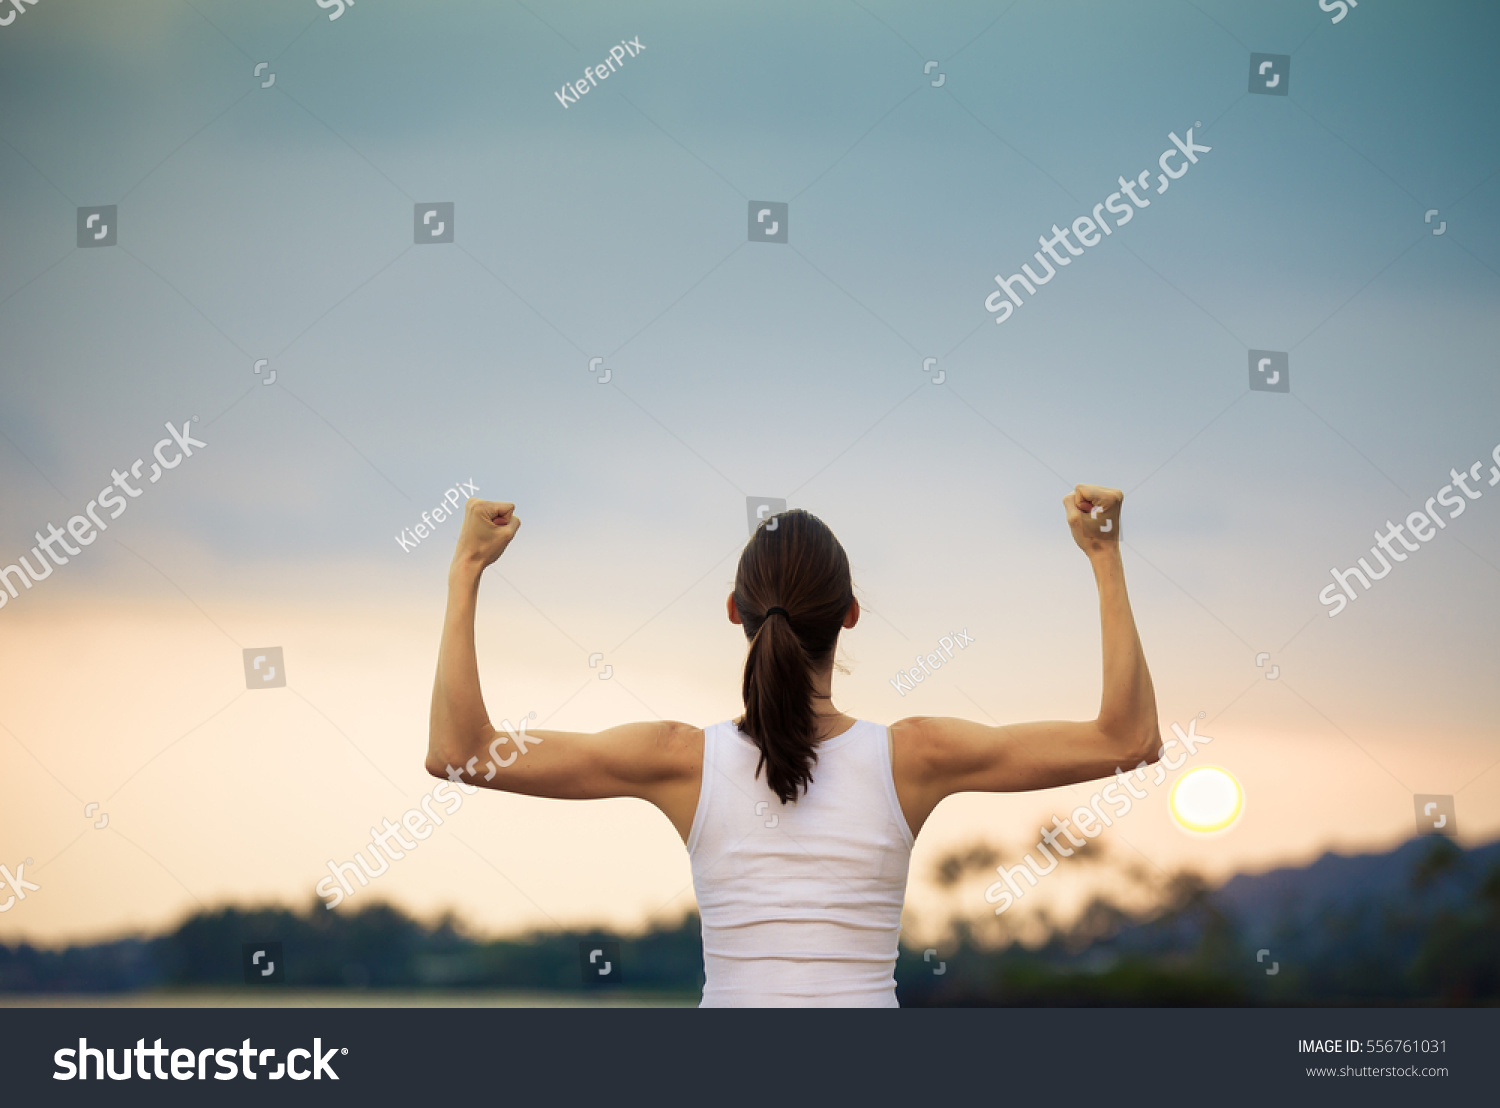 Woman power! Strong and confident woman flexing her muscles.  #556761031